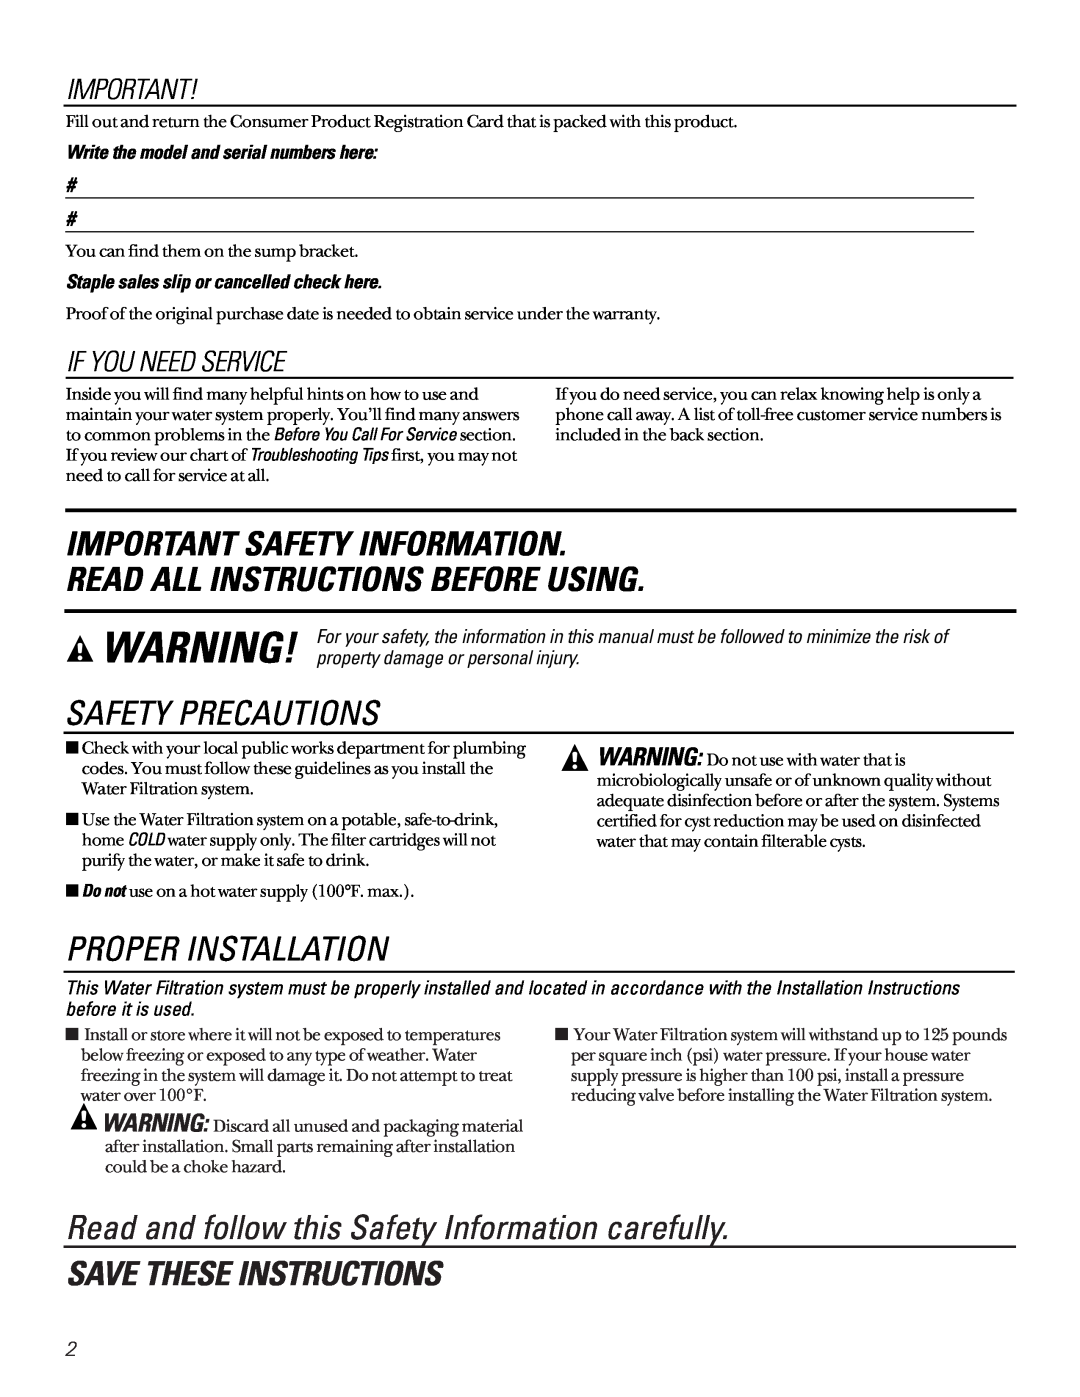 GE GN1S04C Important Safety Information, Read All Instructions Before Using, Safety Precautions, Proper Installation 